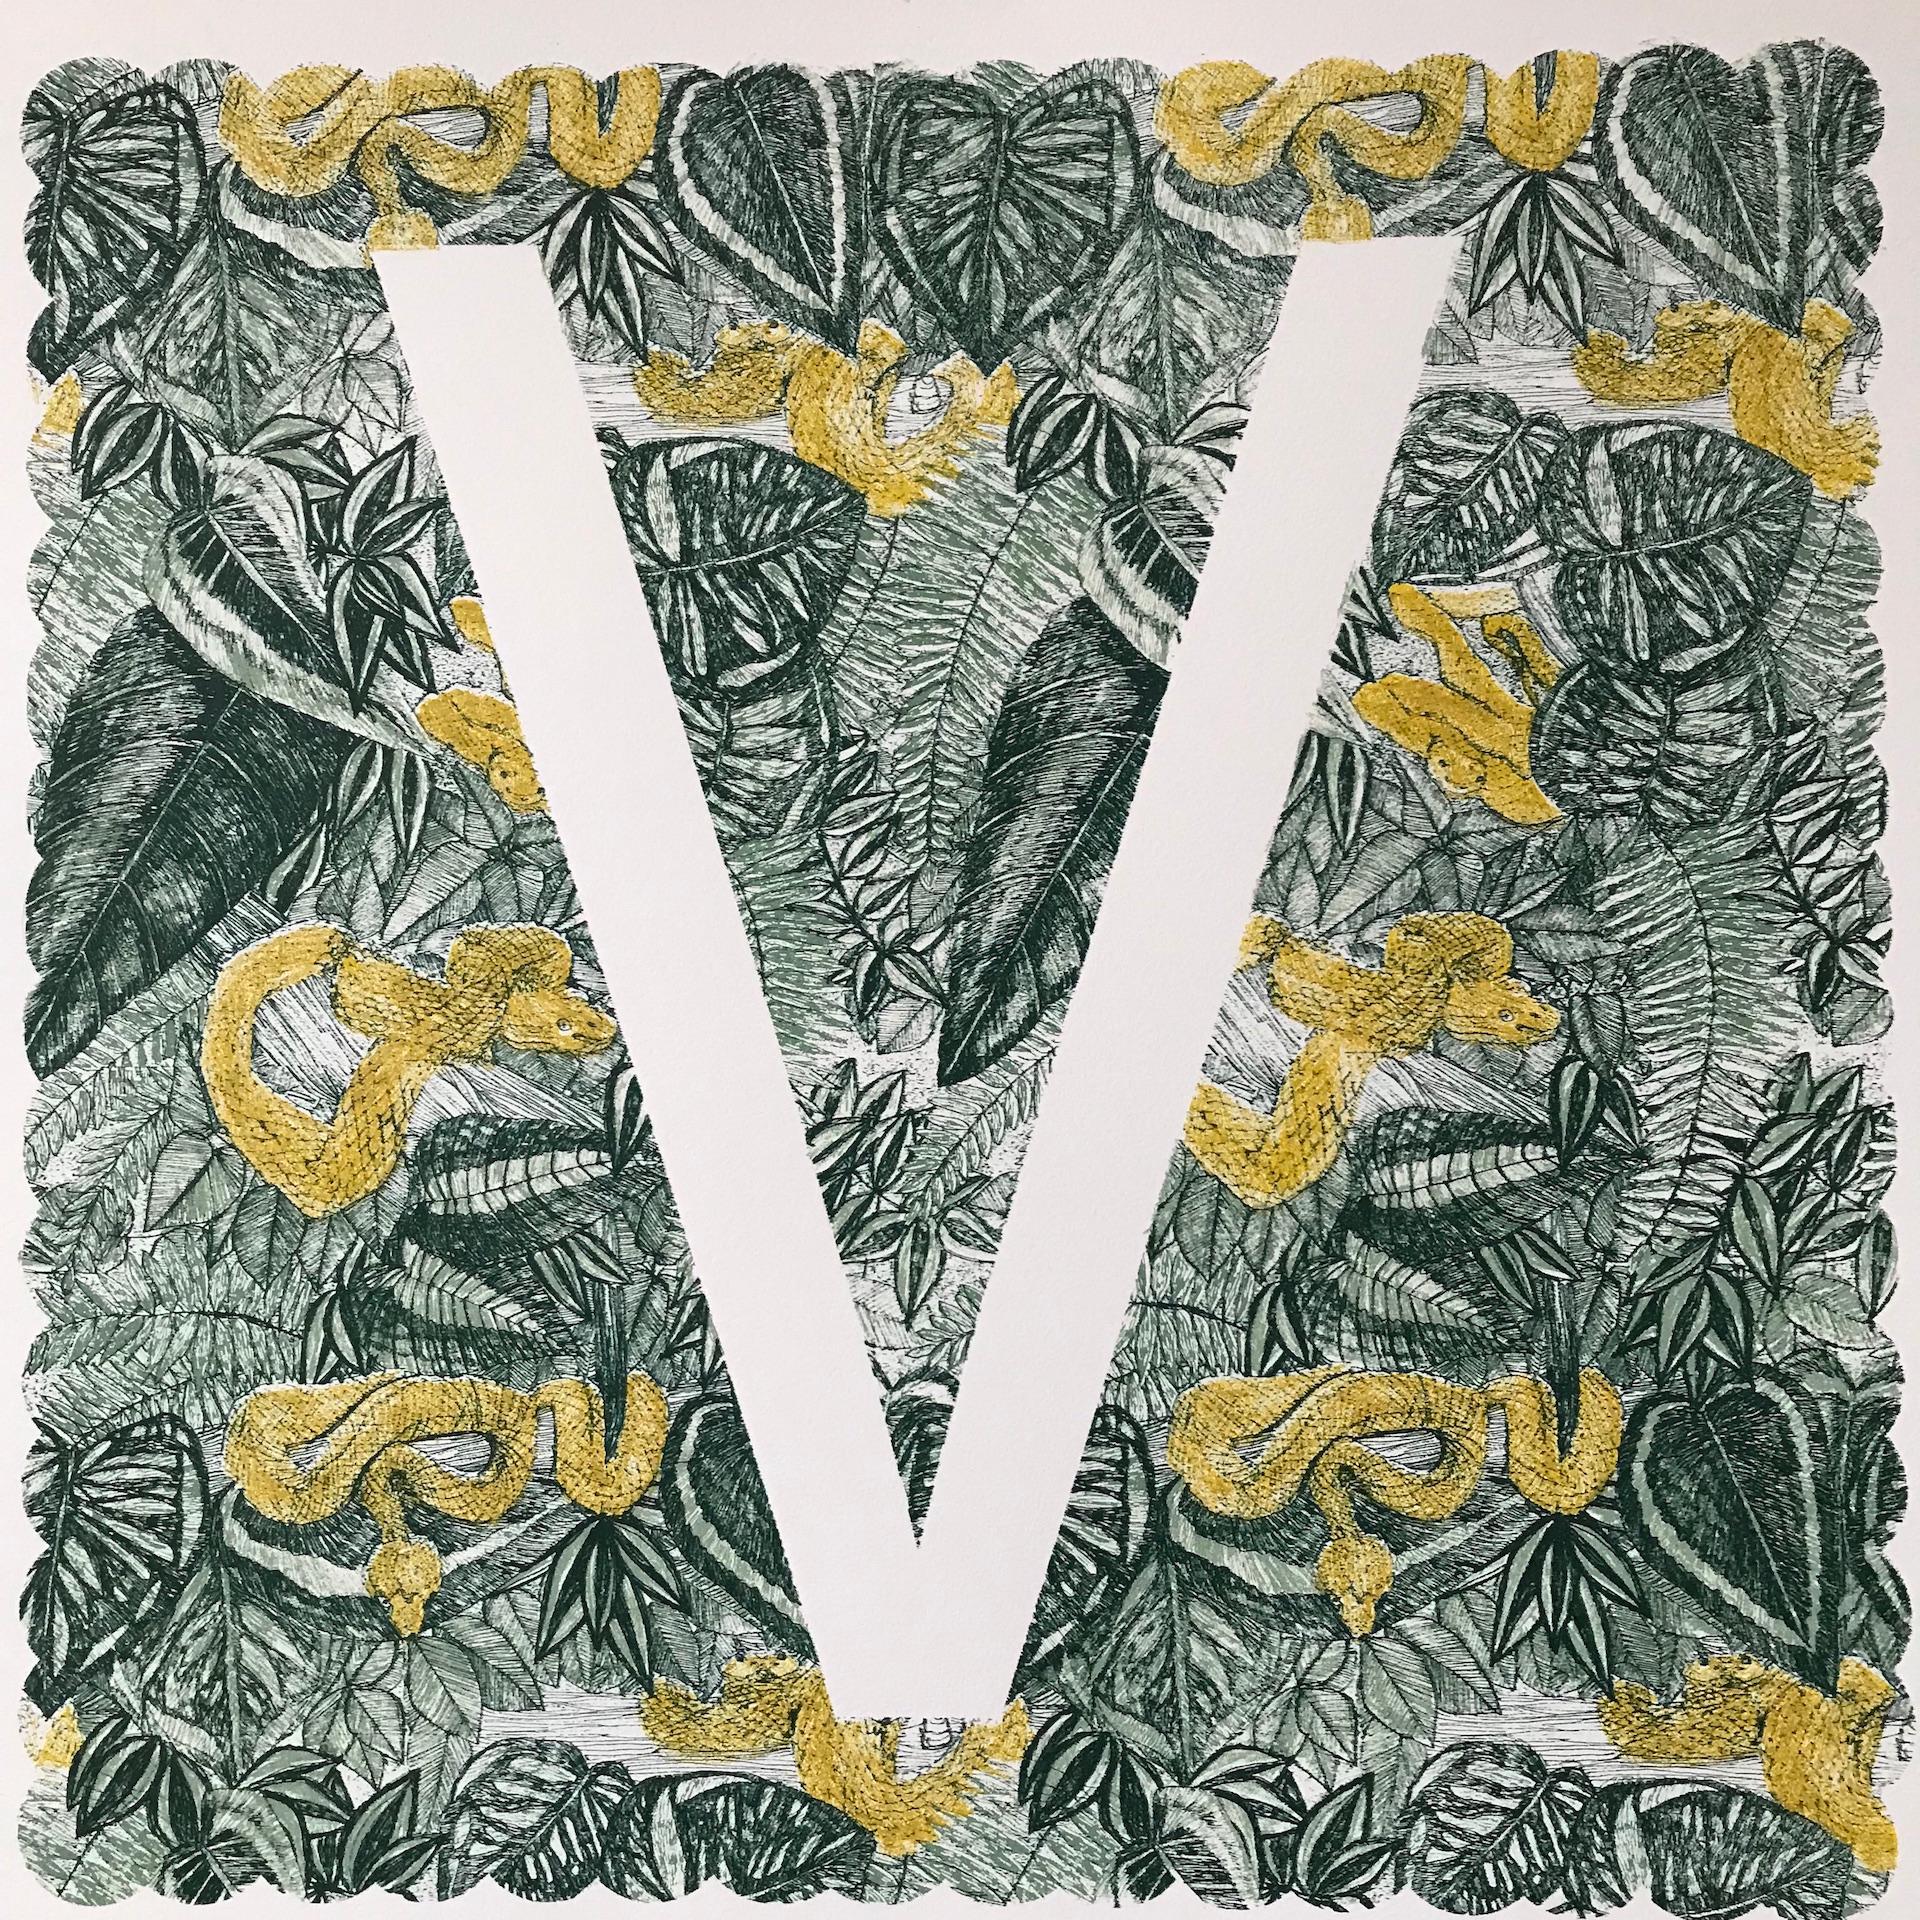 Clare Halifax, V is for Viper, Limited Edition Animal Art, Bright Monogram Print